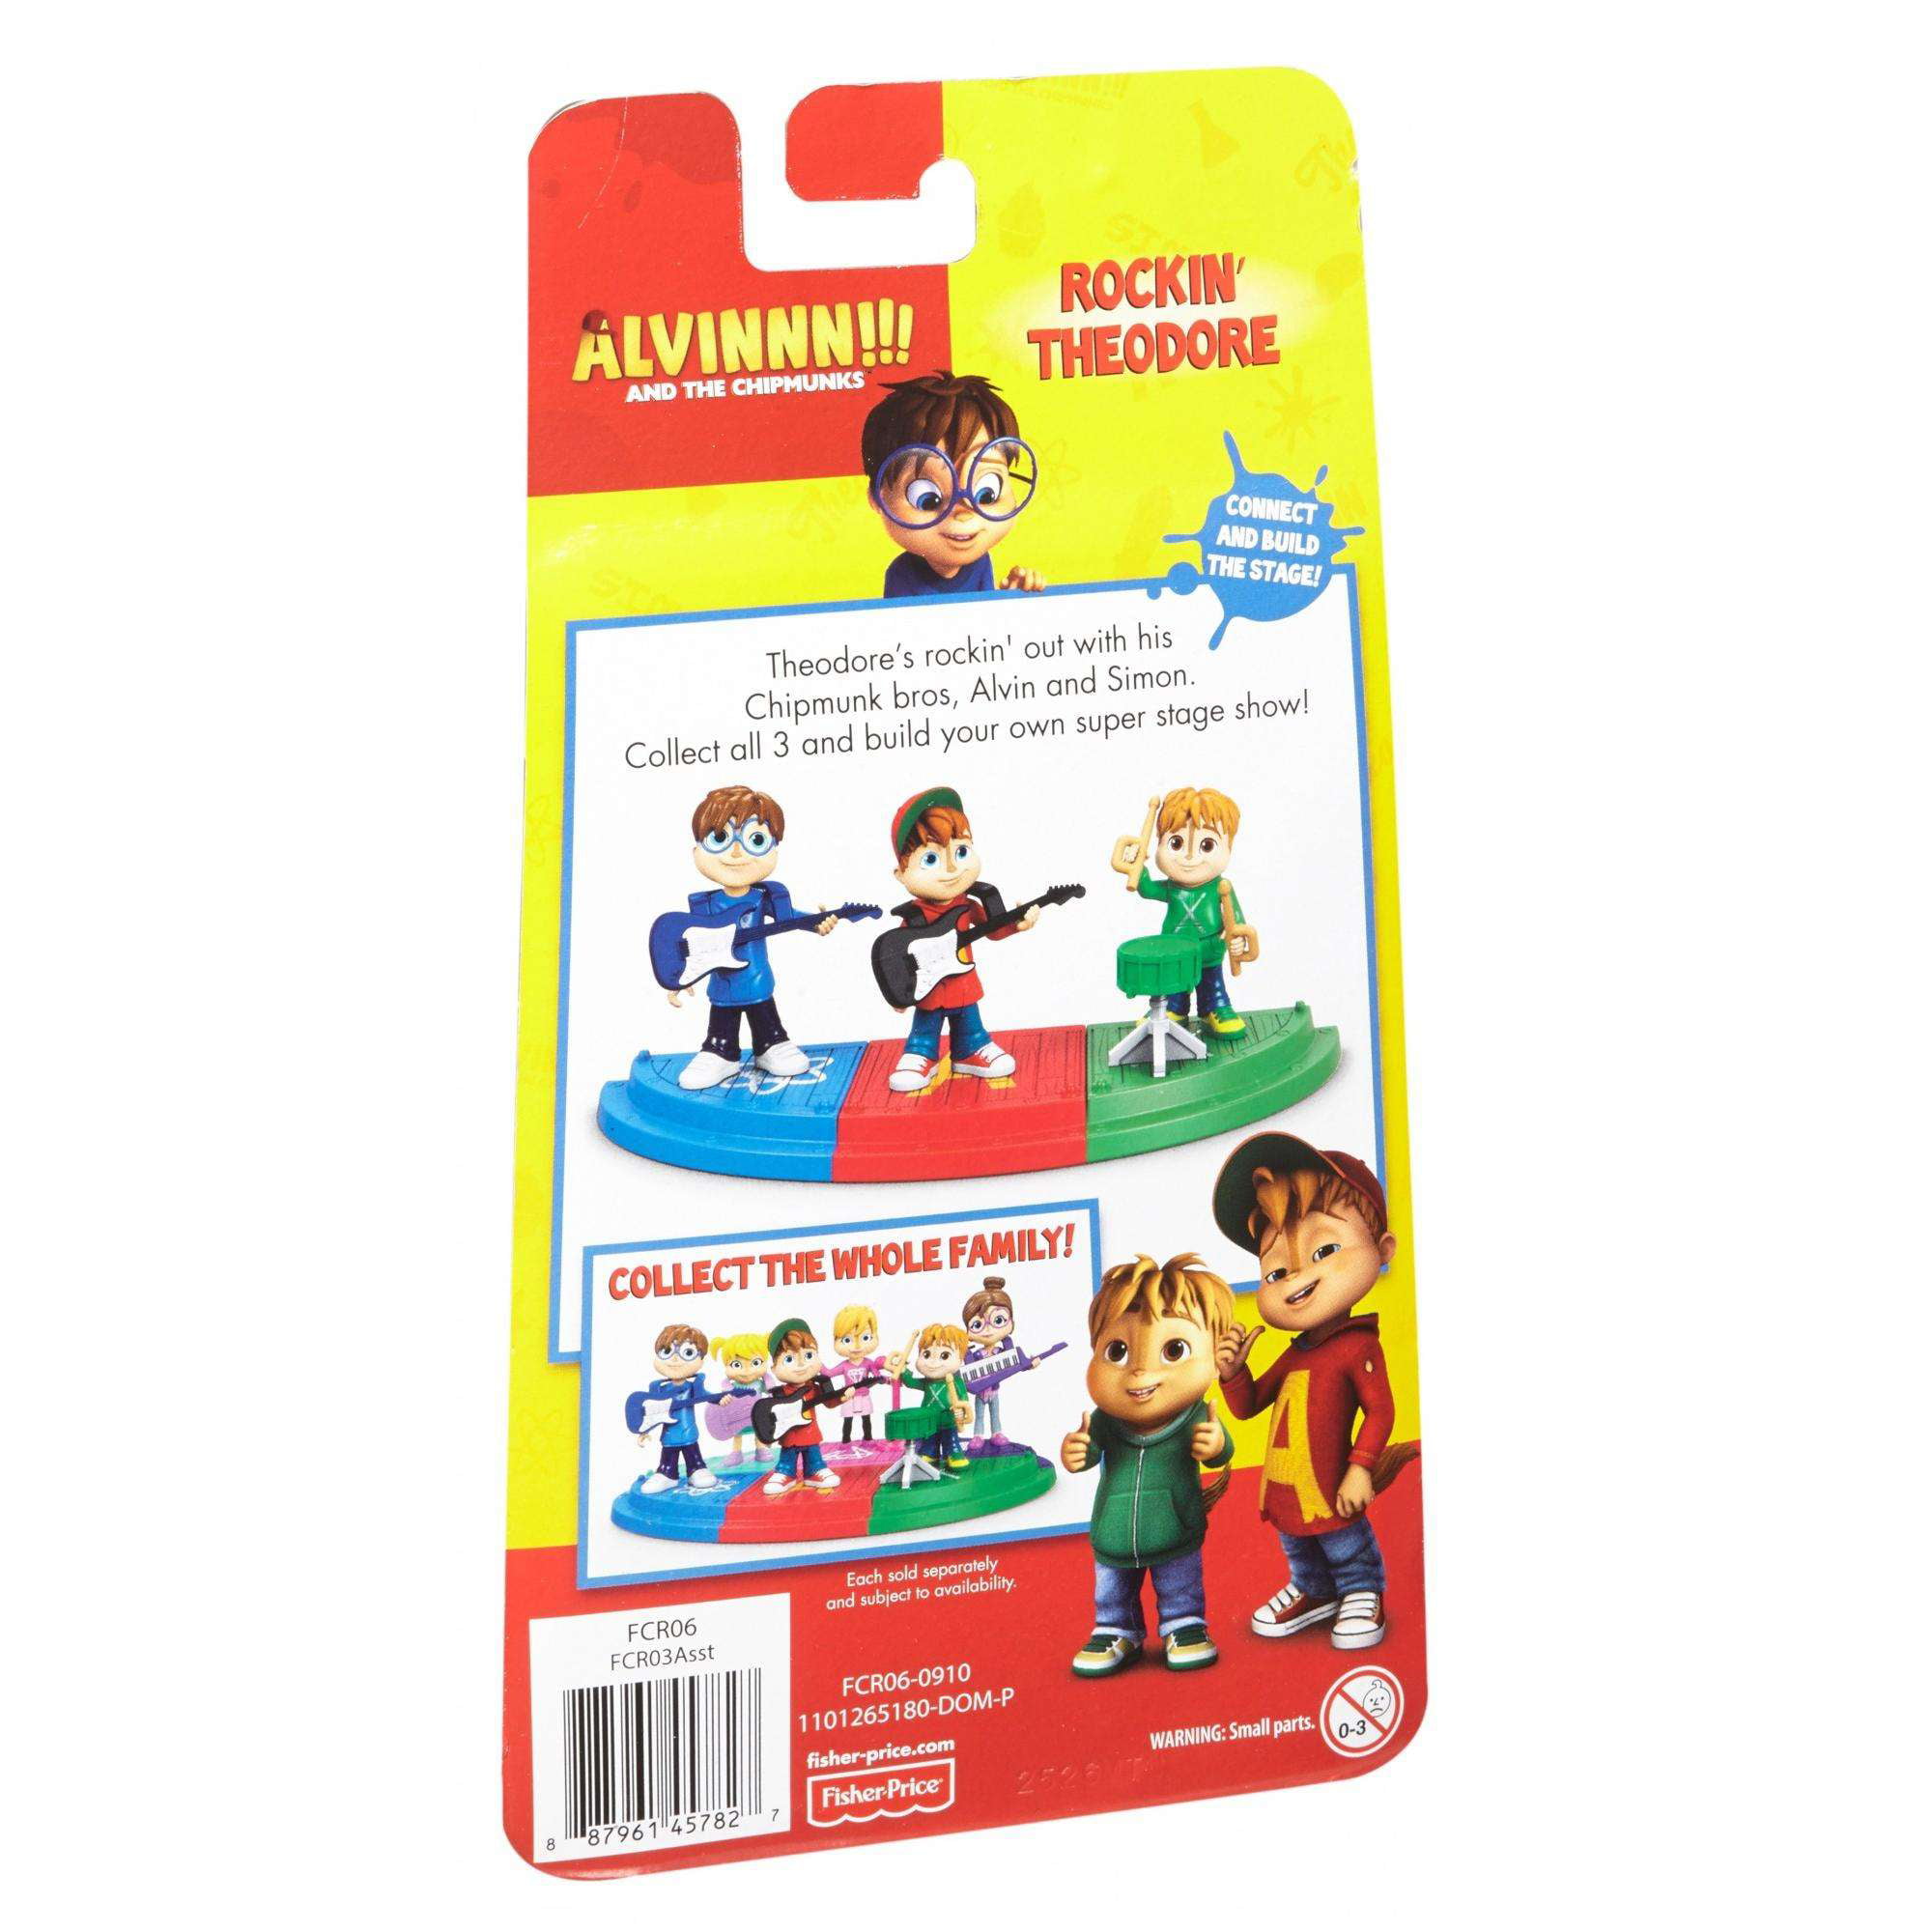 alvin and the chipmunks action figures